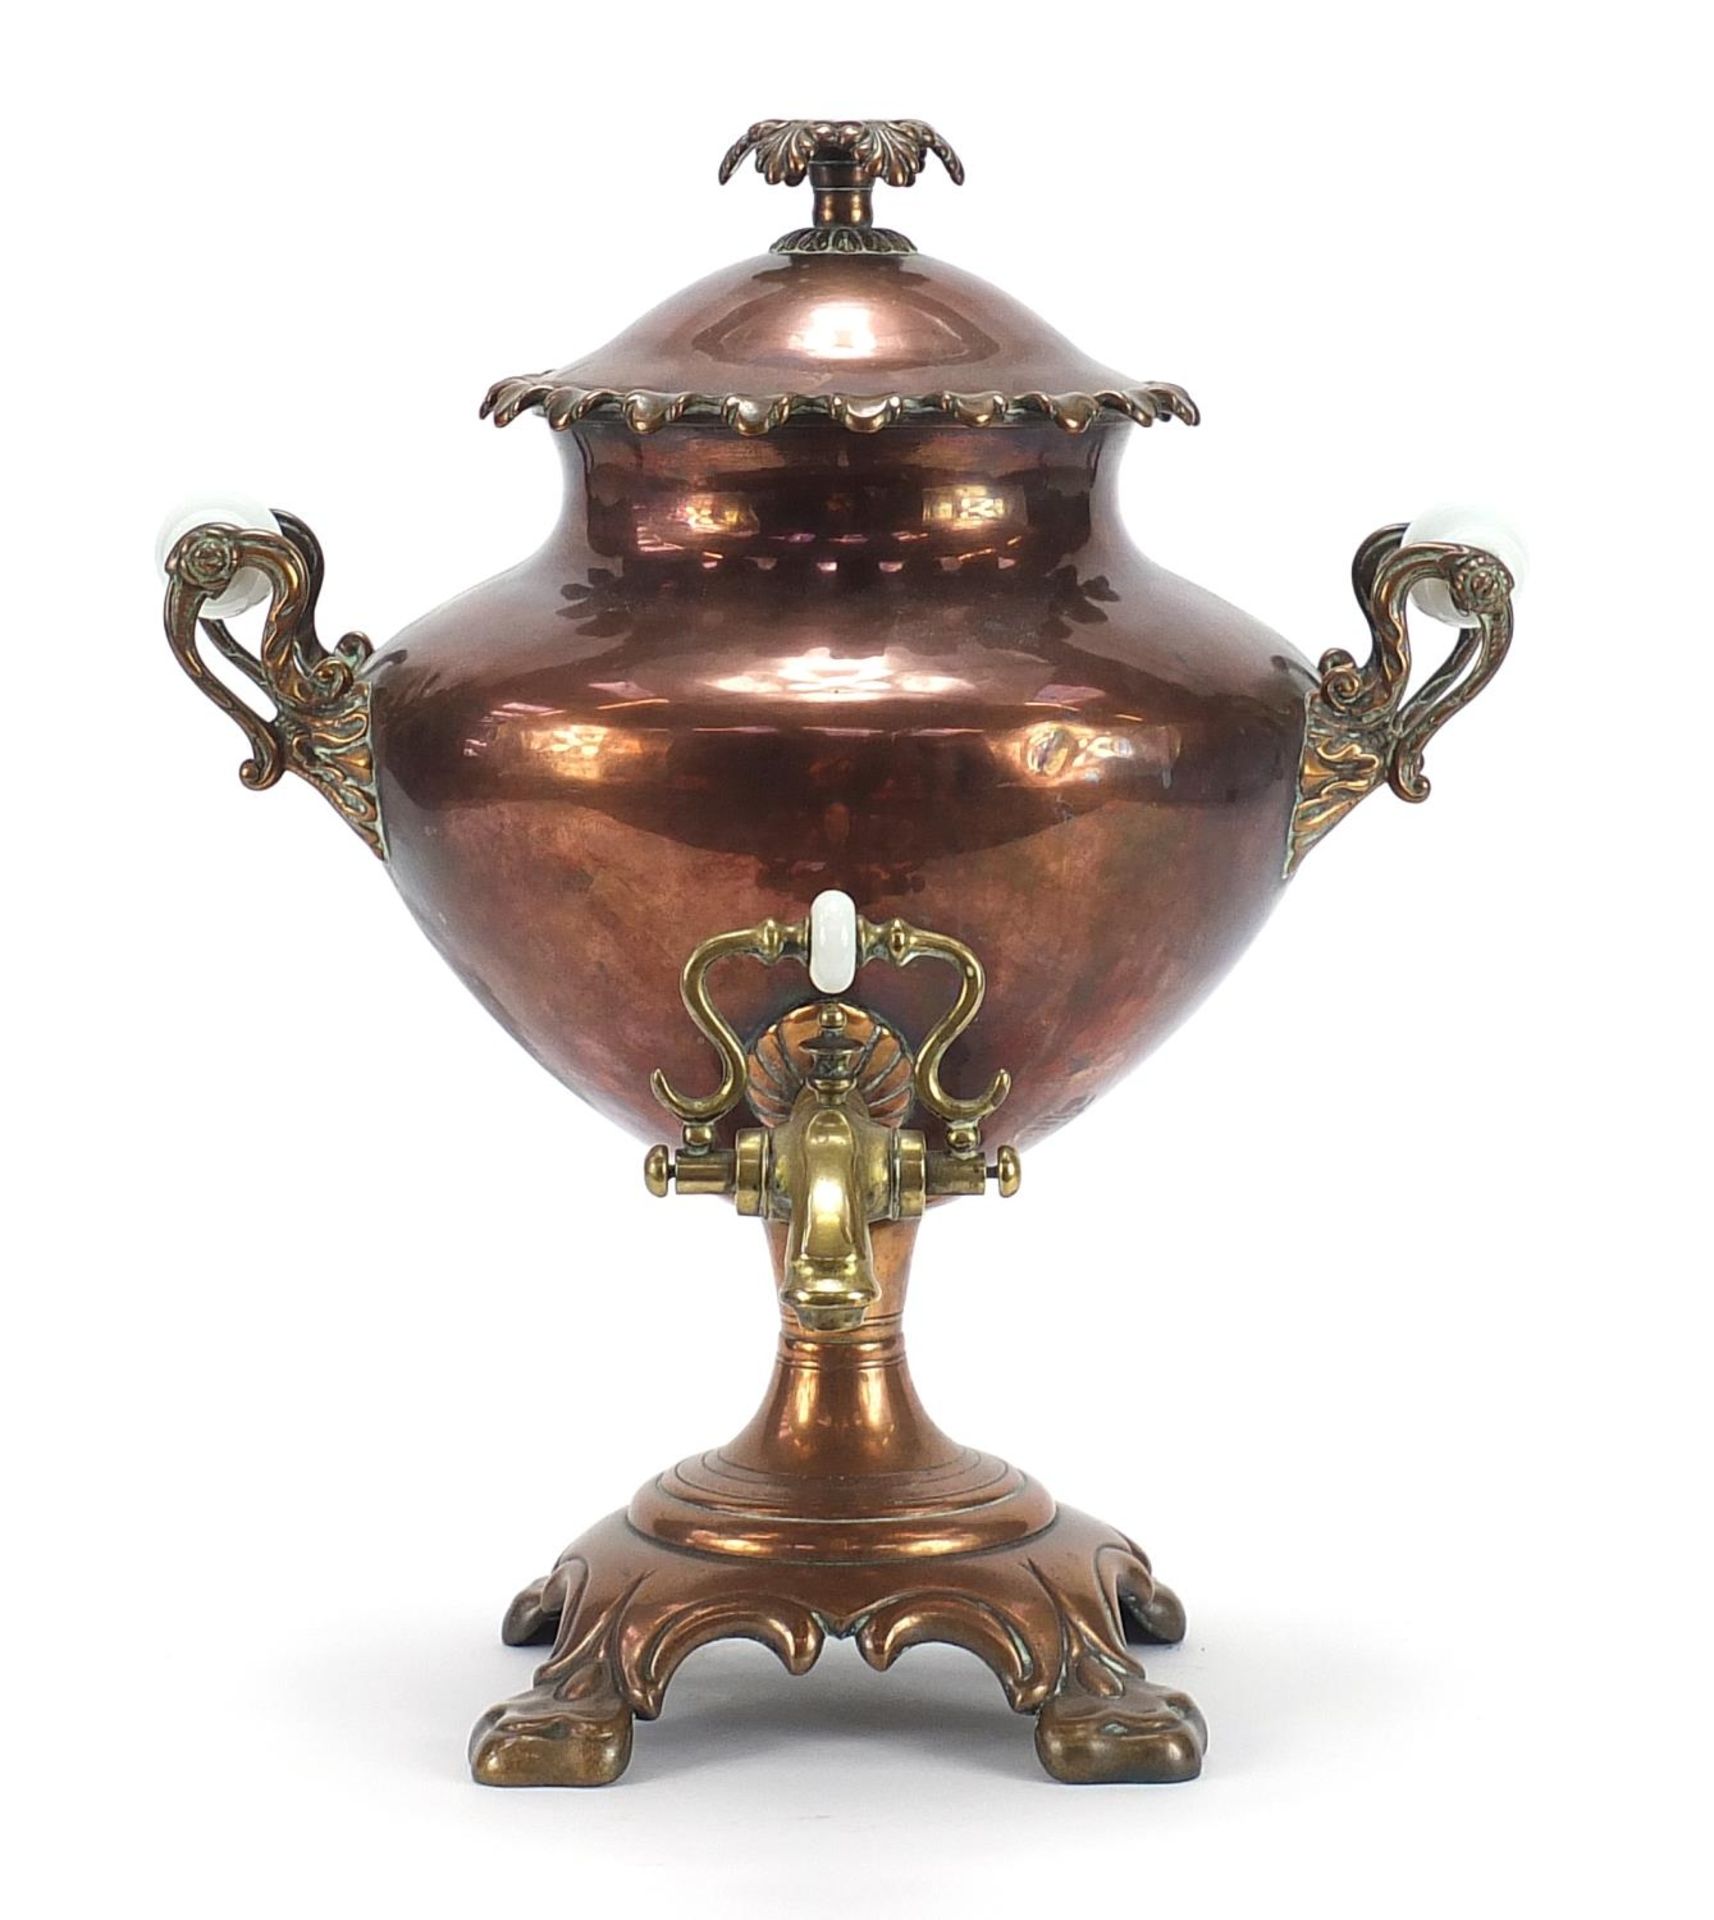 19th century copper and brass samovar impressed Warranted Best London Manufacture to the inside of